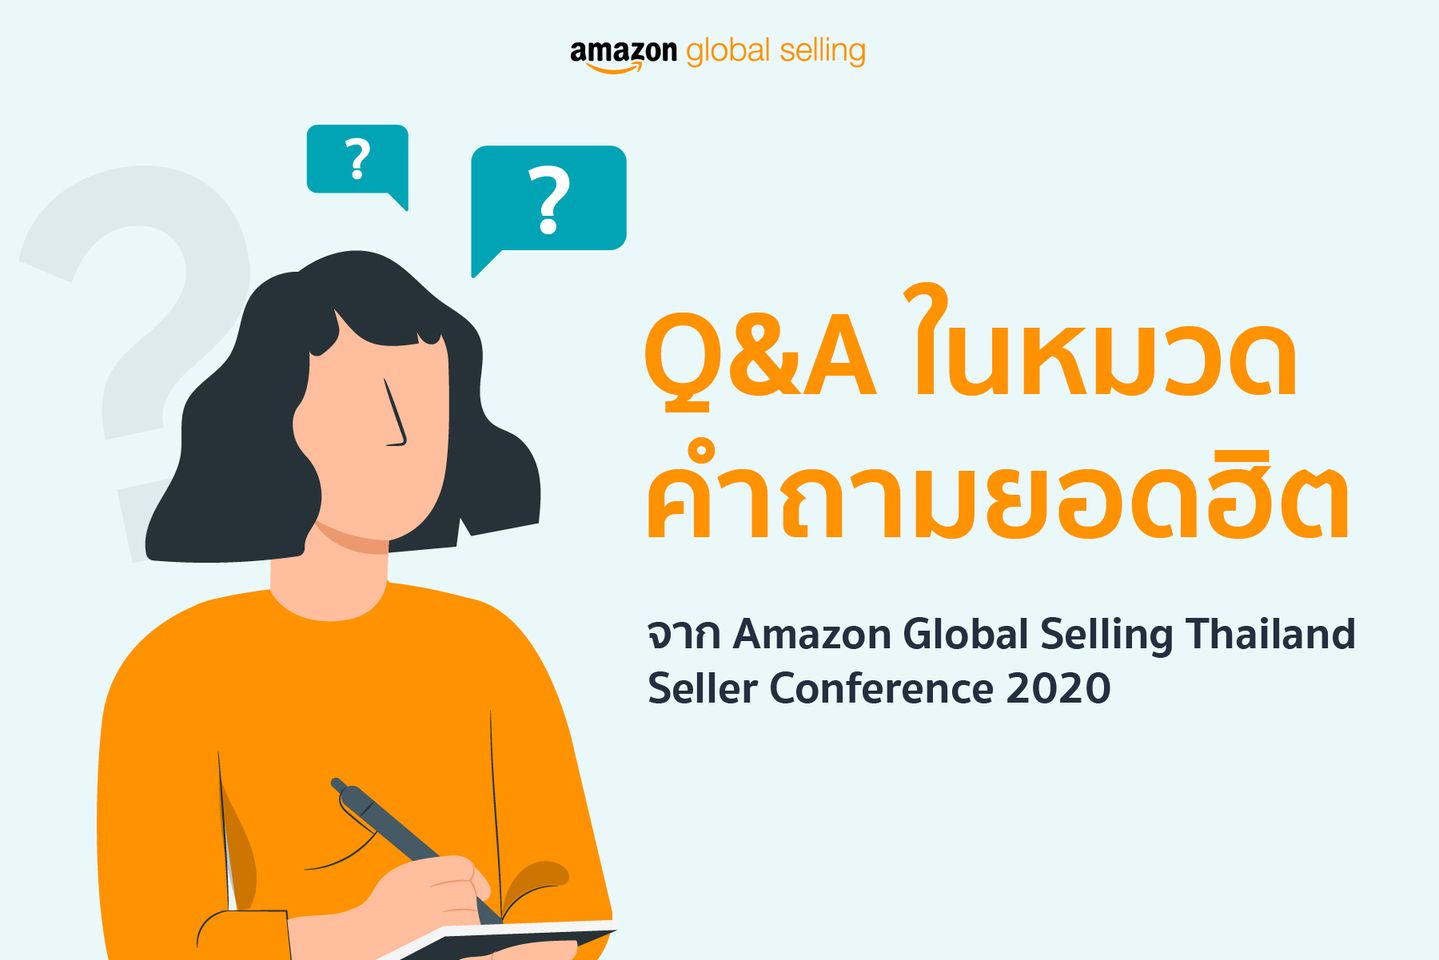 Amazon Global Selling Thailand - Q&A - Digital Marketing Content